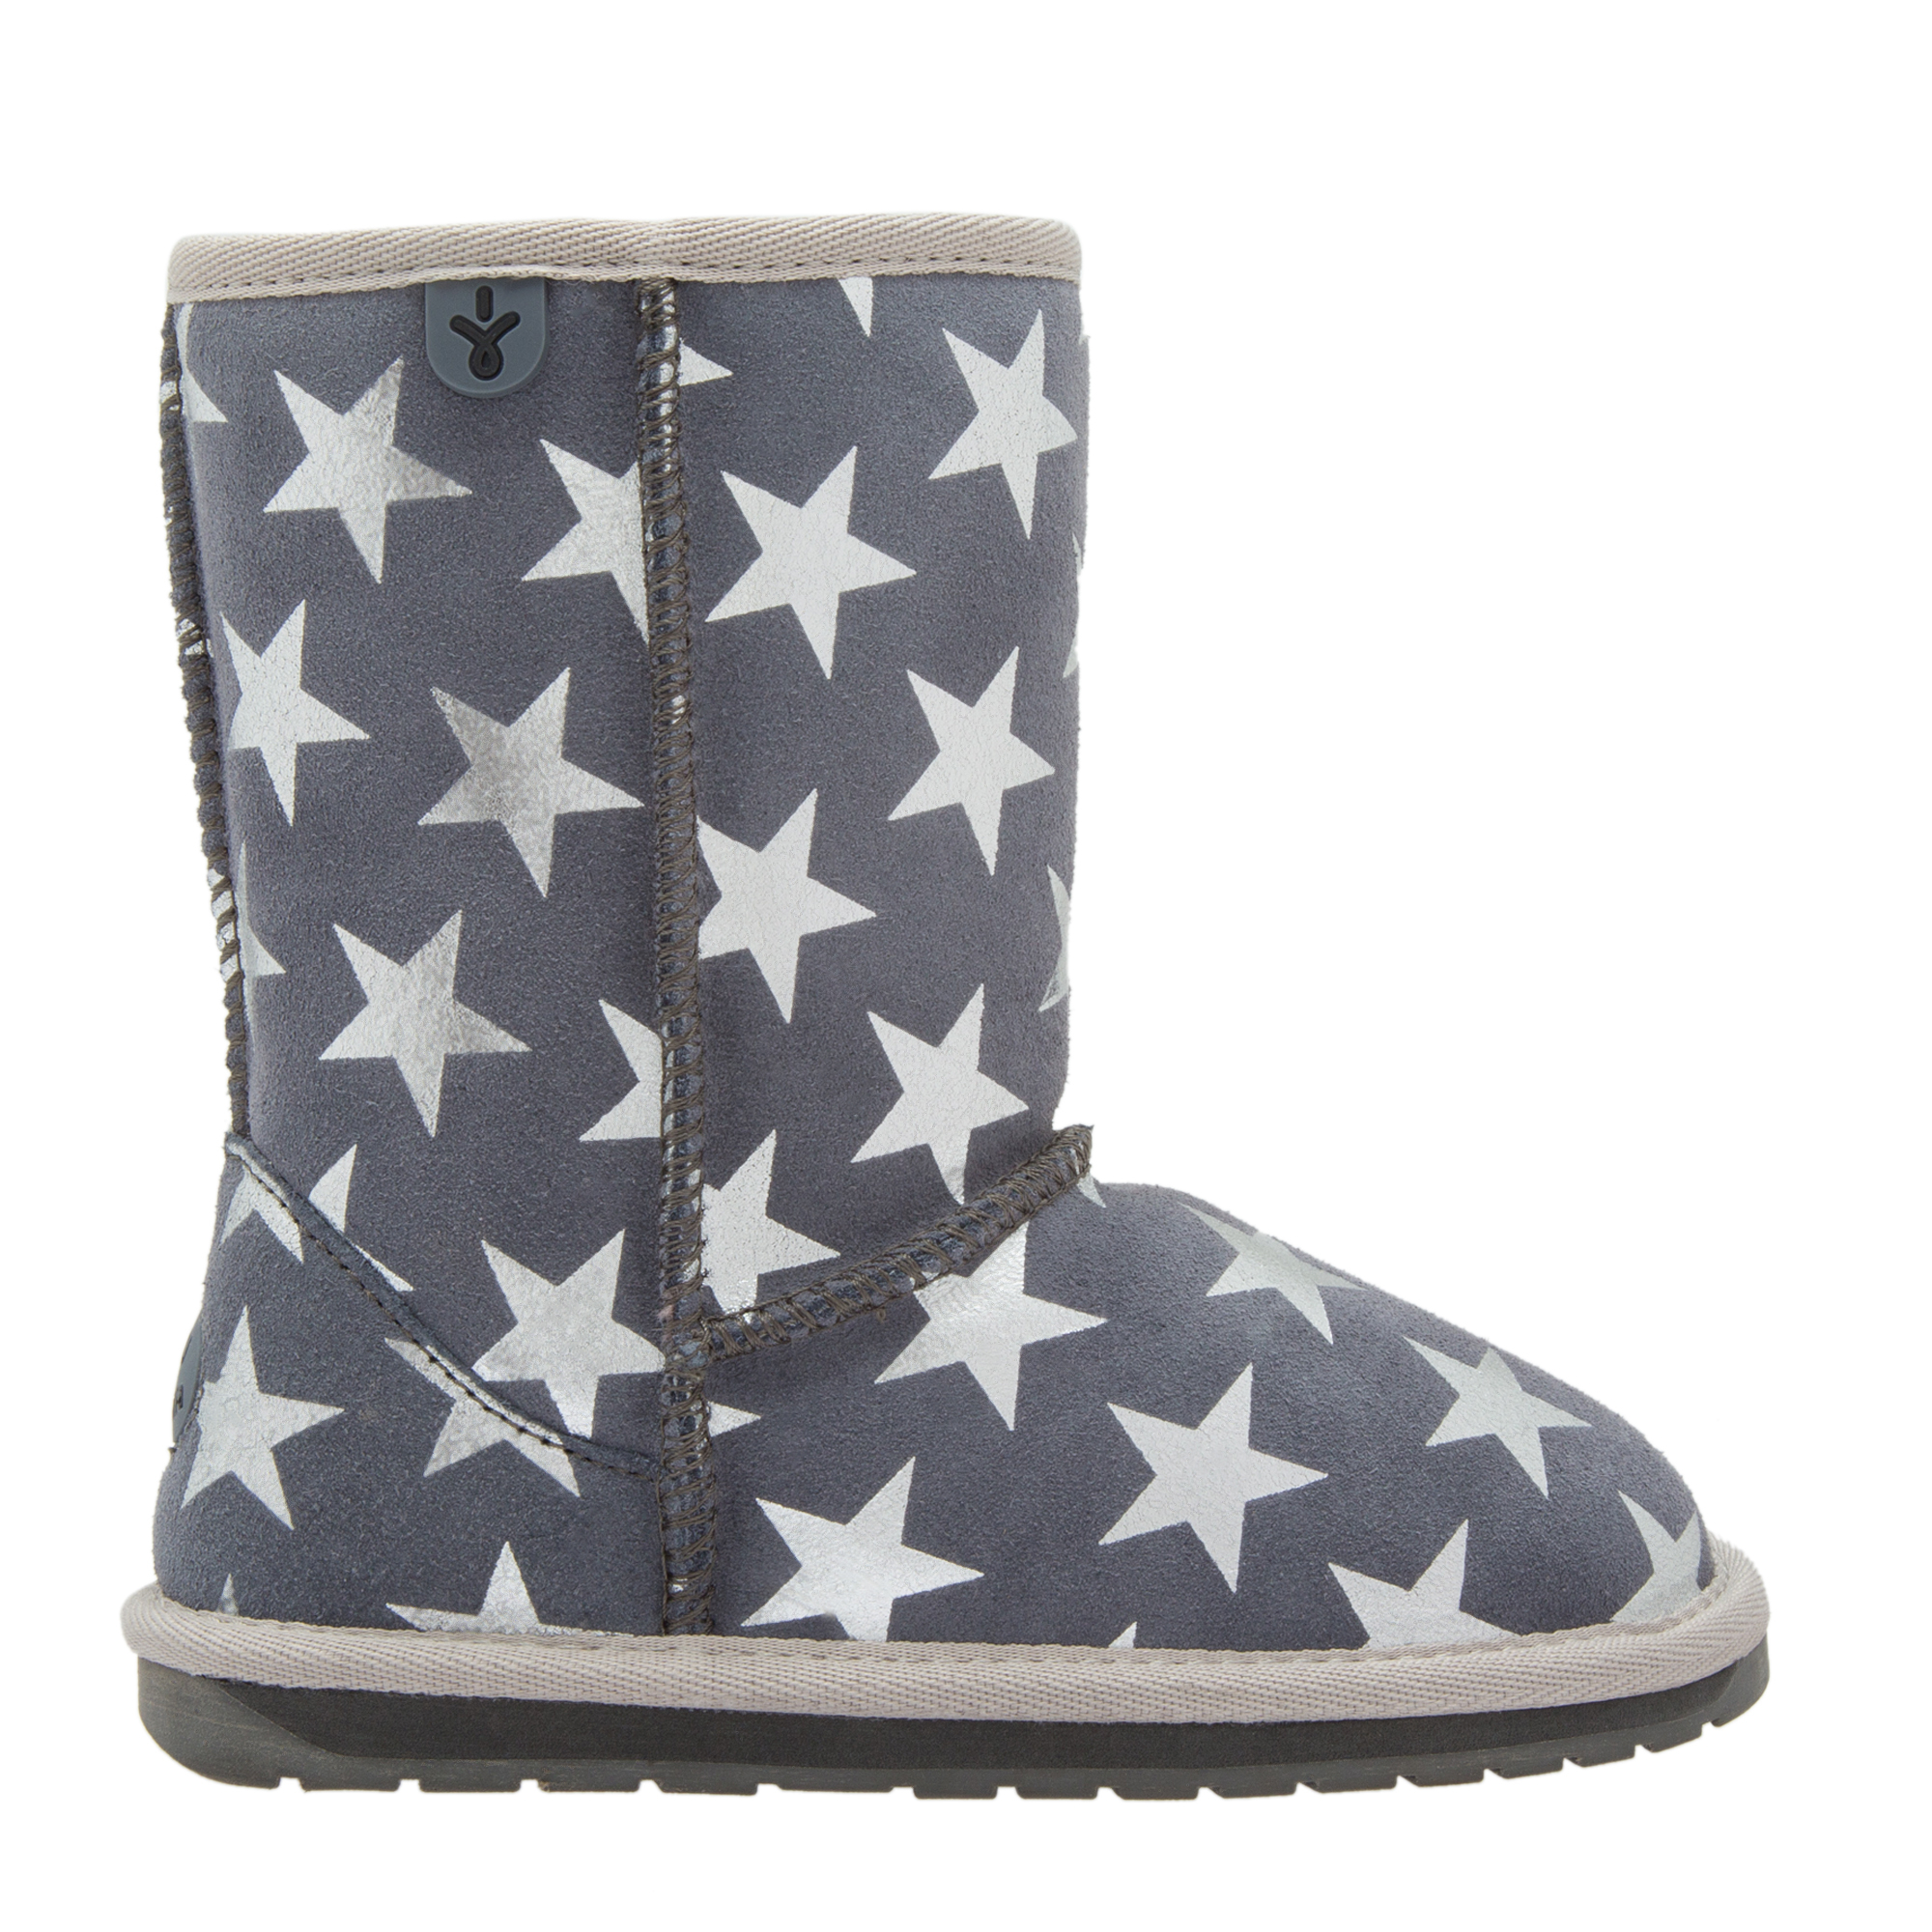 Starry Night boots